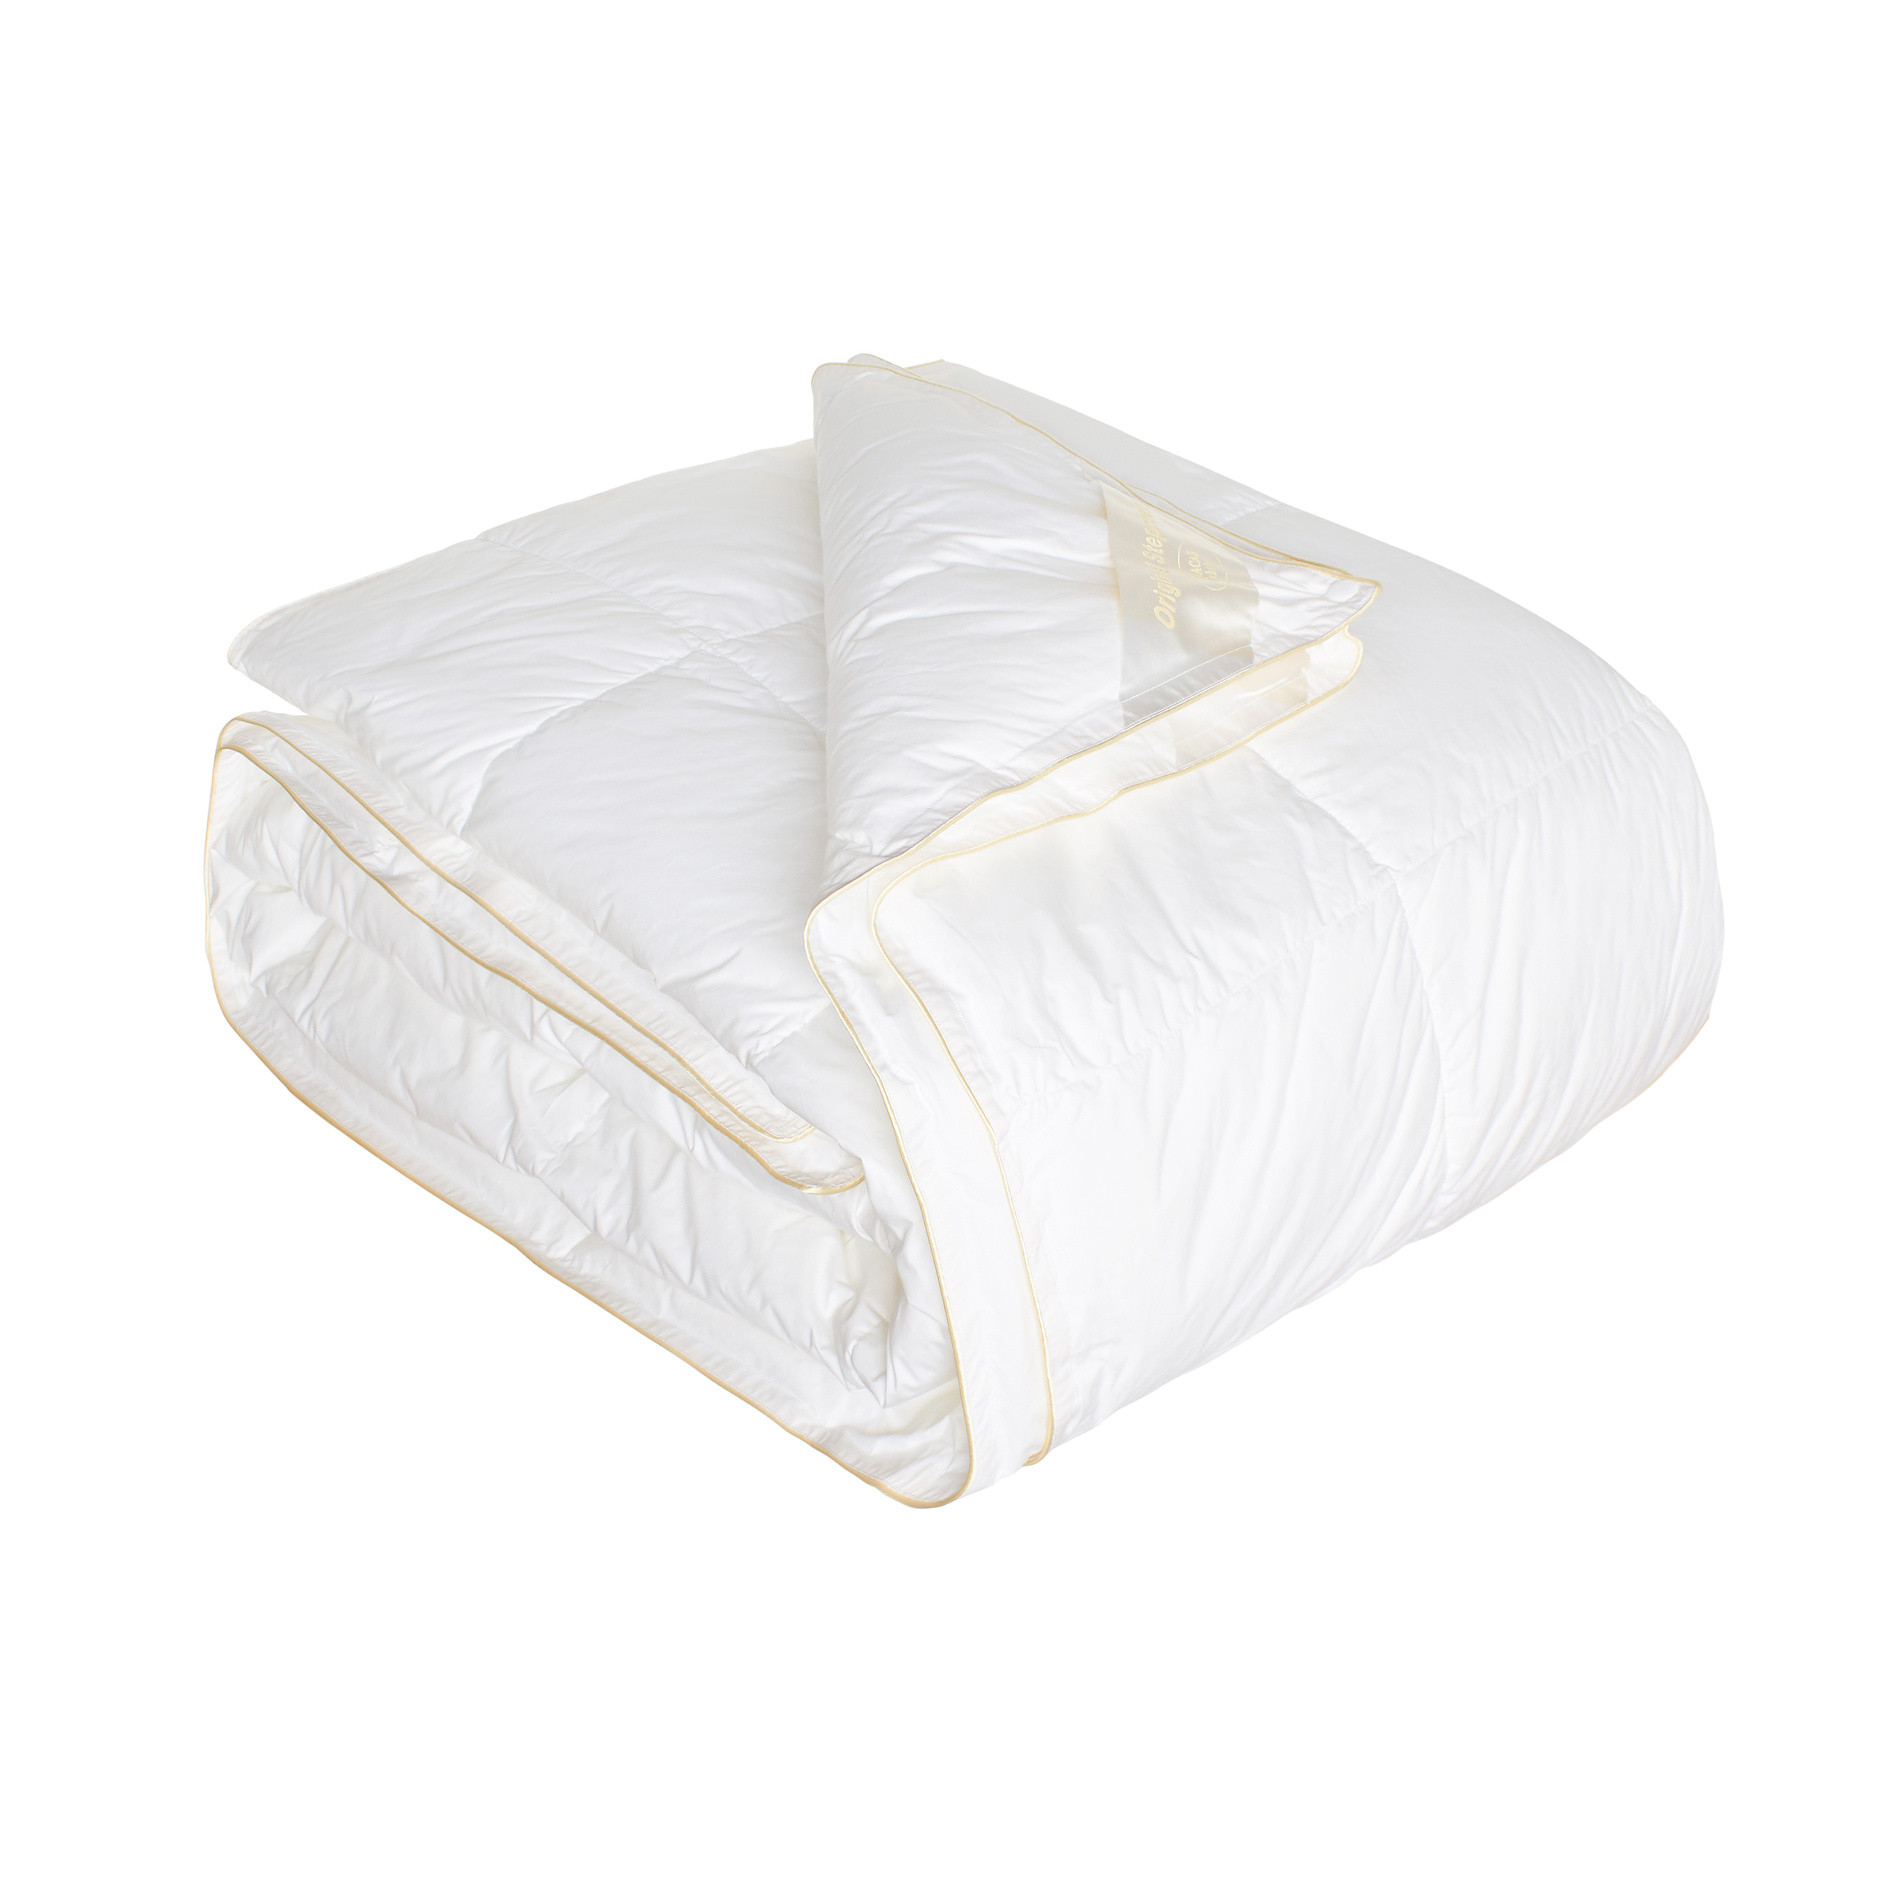 Dual 4-seasons duvet with feathers, White, large image number 0